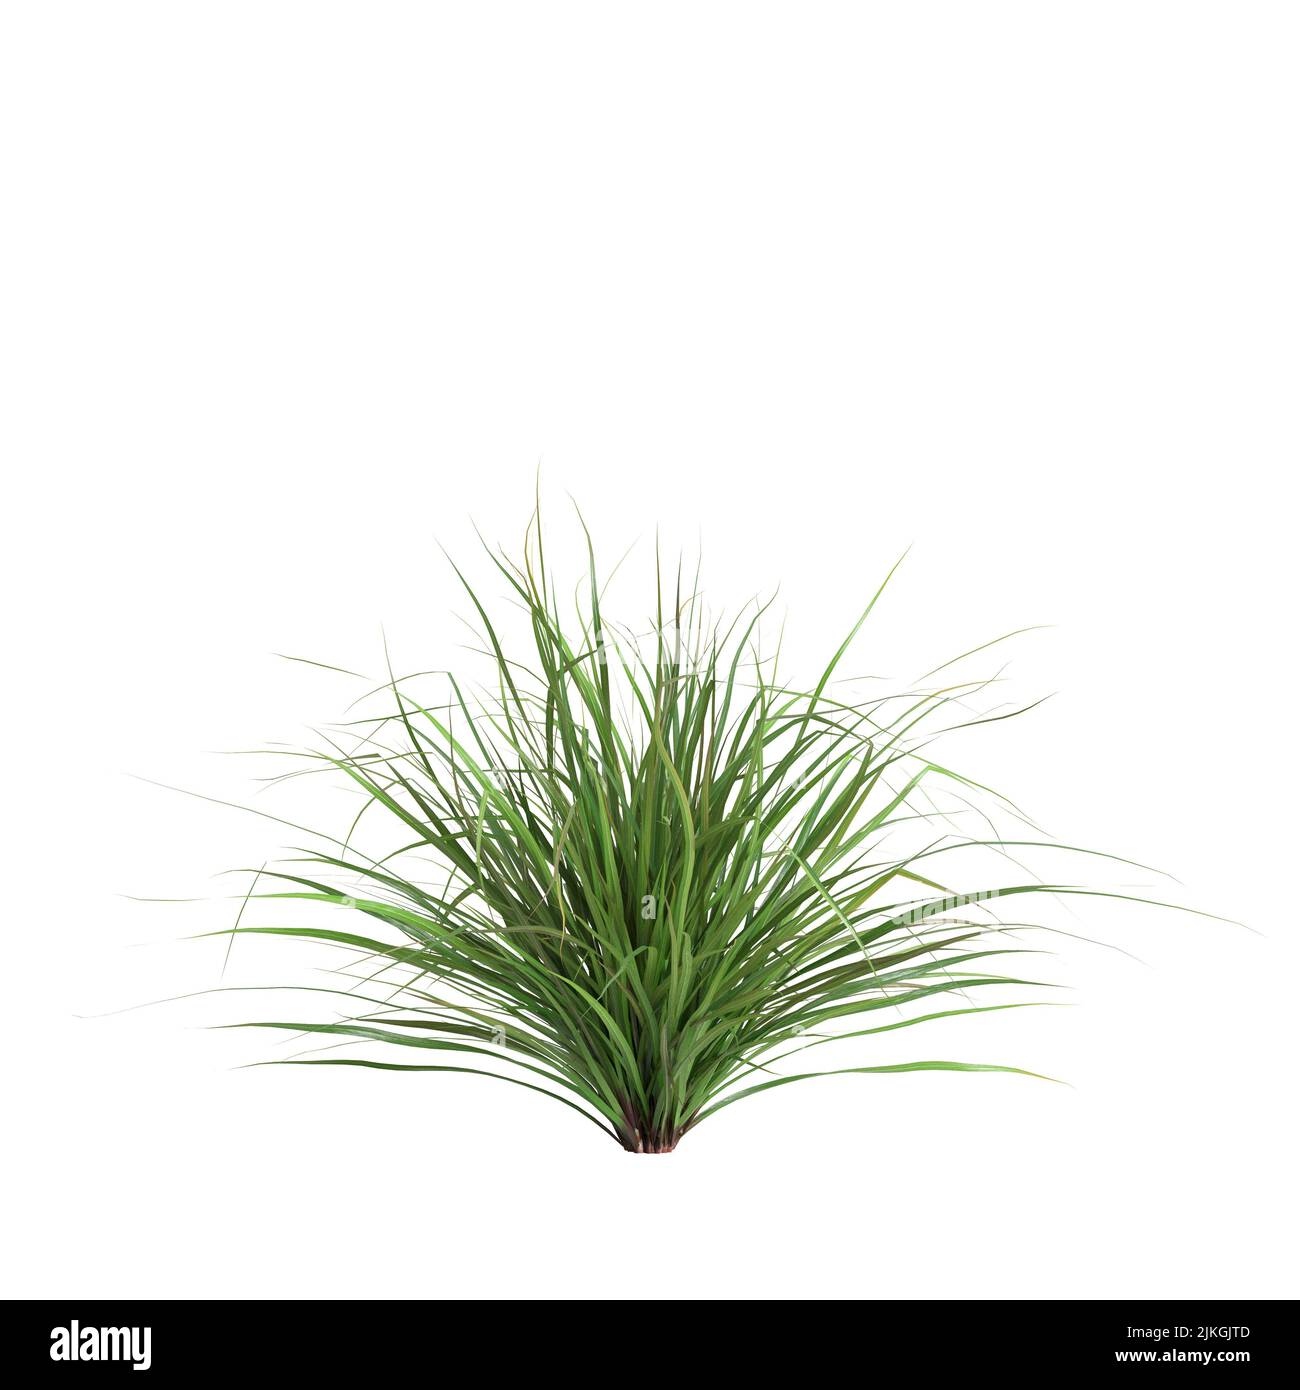 3d illustration of cymbopogon citratus grass isolated on white background Stock Photo